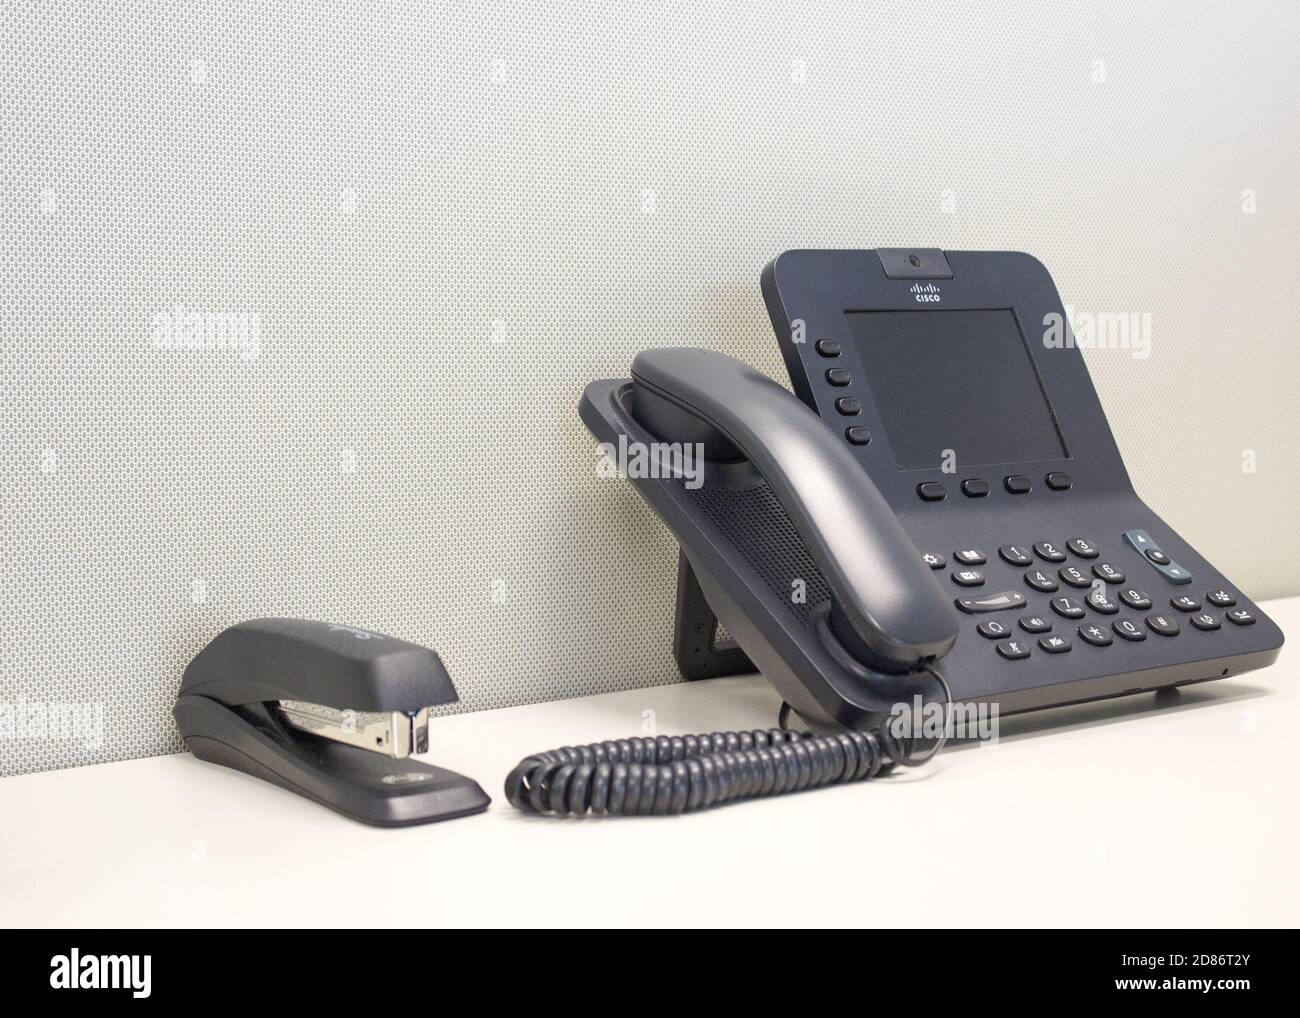 Office phone and stapler Stock Photo